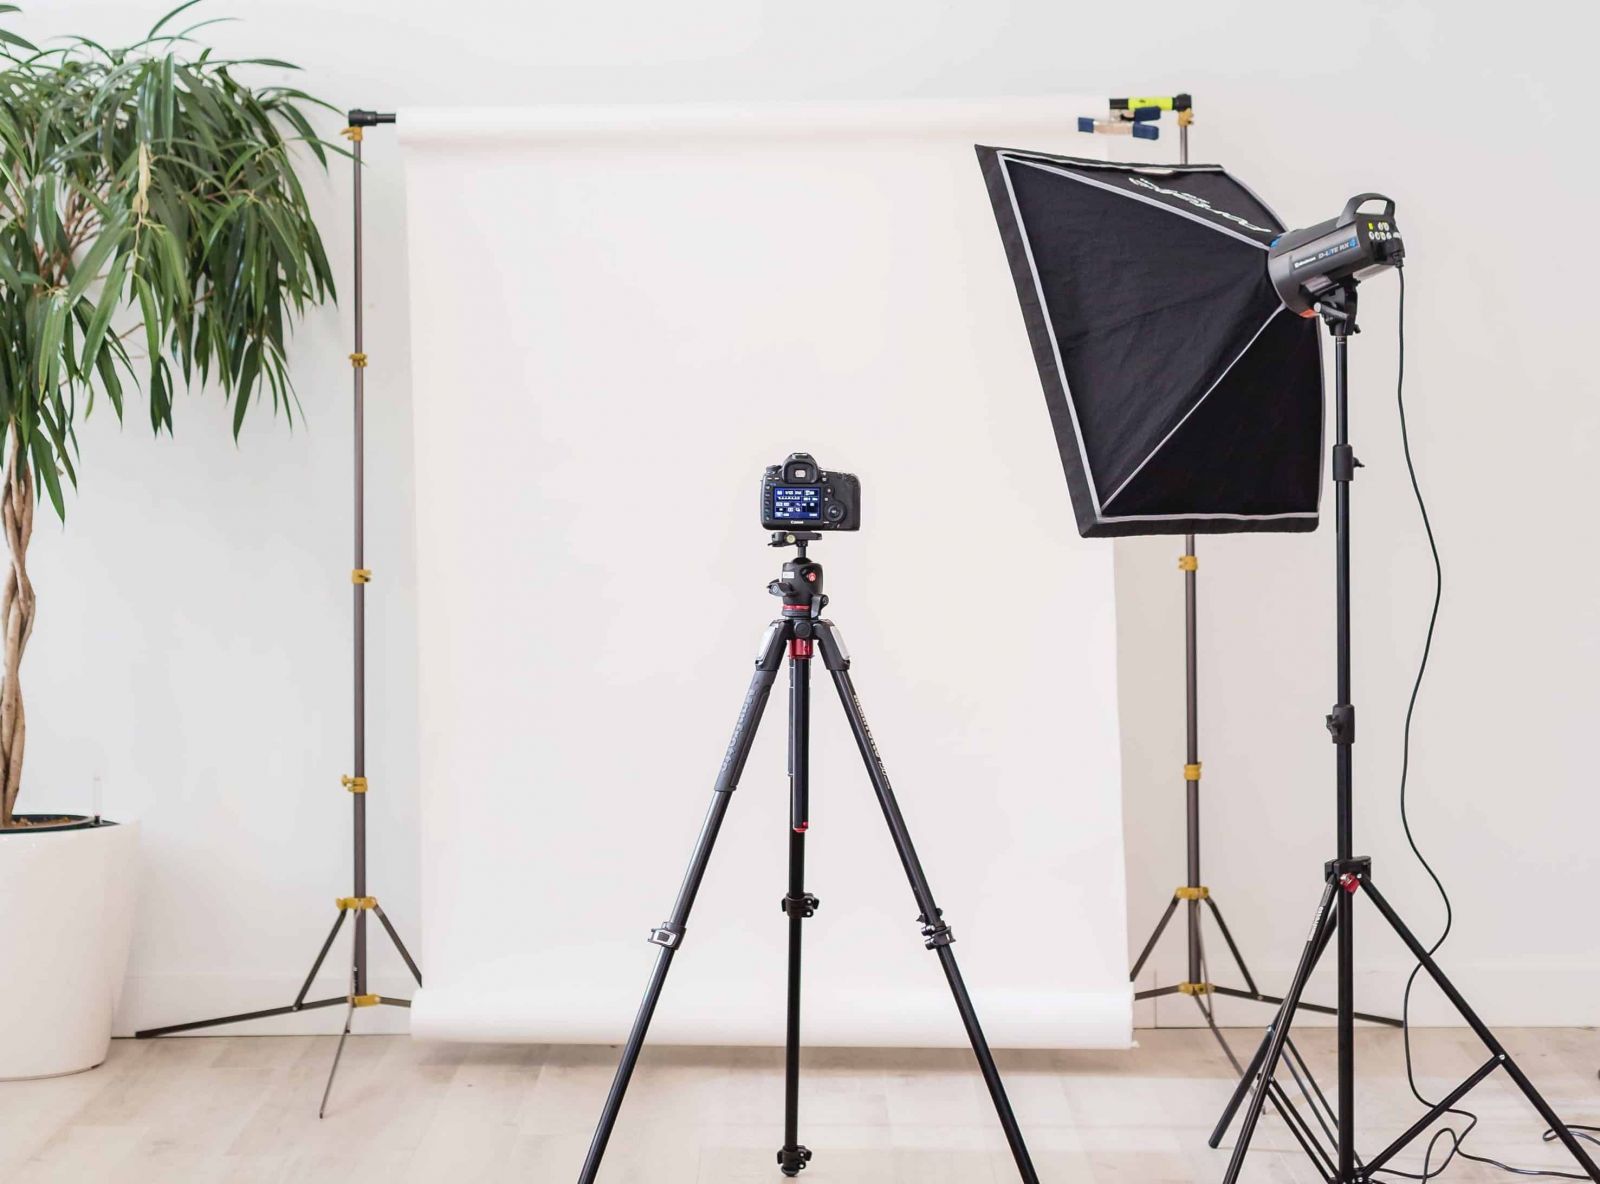 The 7 Mistakes to Avoid When Making a Product Video (Learned the Hard Way)